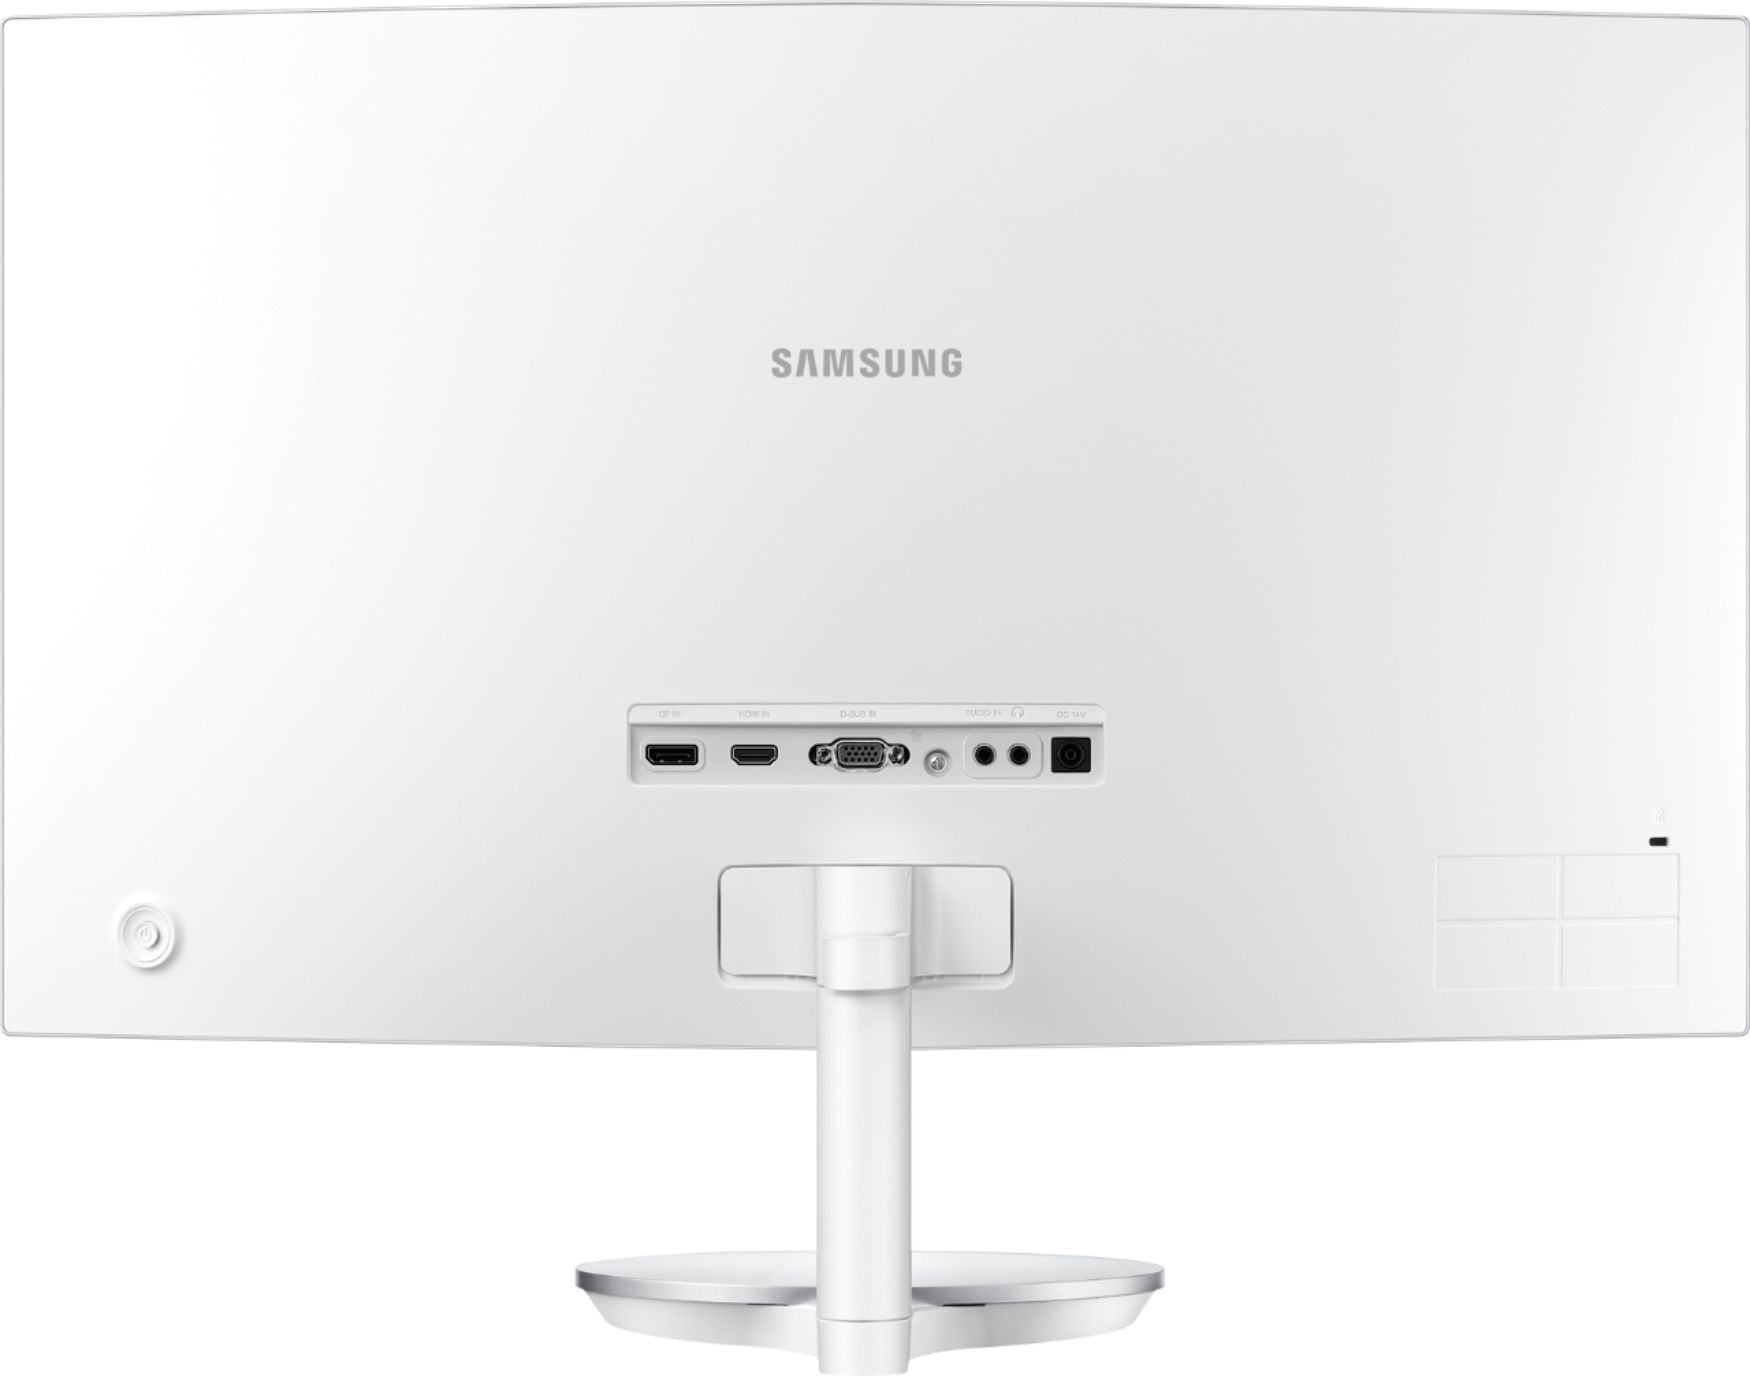 Back View: Samsung - Geek Squad Certified Refurbished 27" LED Curved FHD FreeSync Monitor - Silver